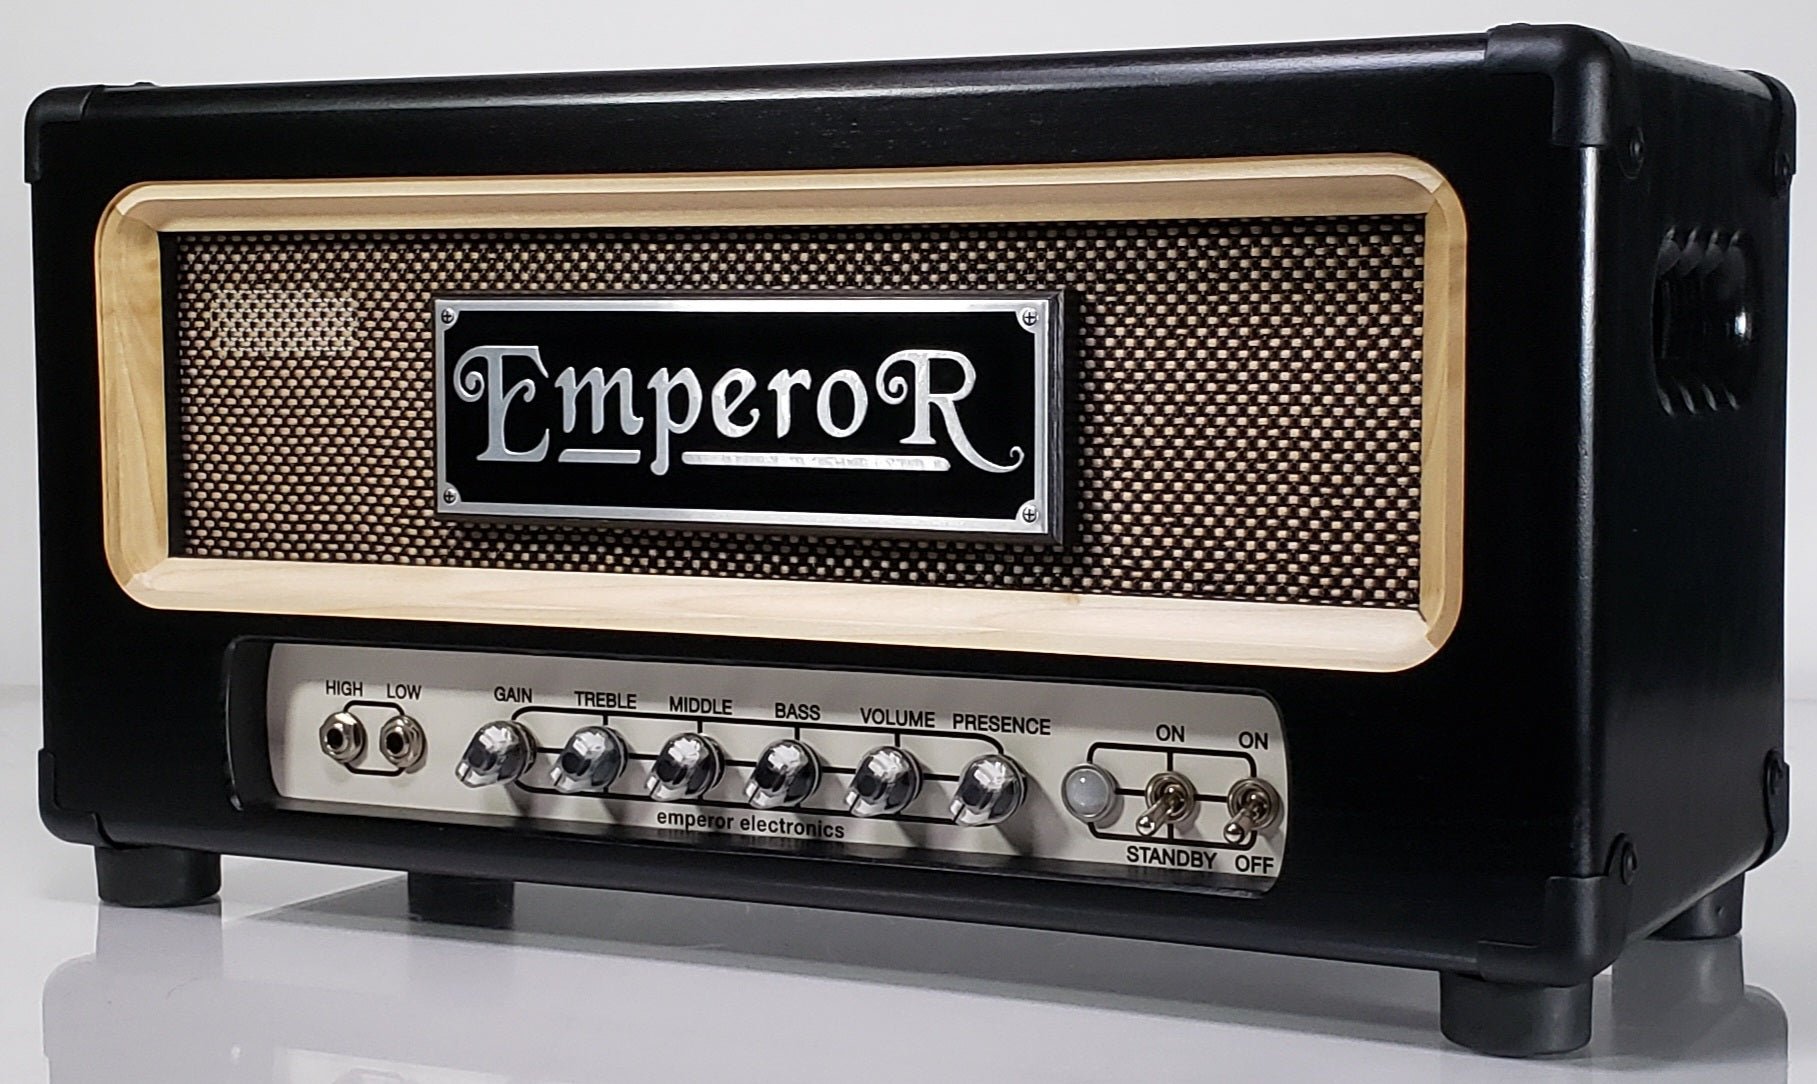 a black 100 watt guiar amplifier with a black and gold grille